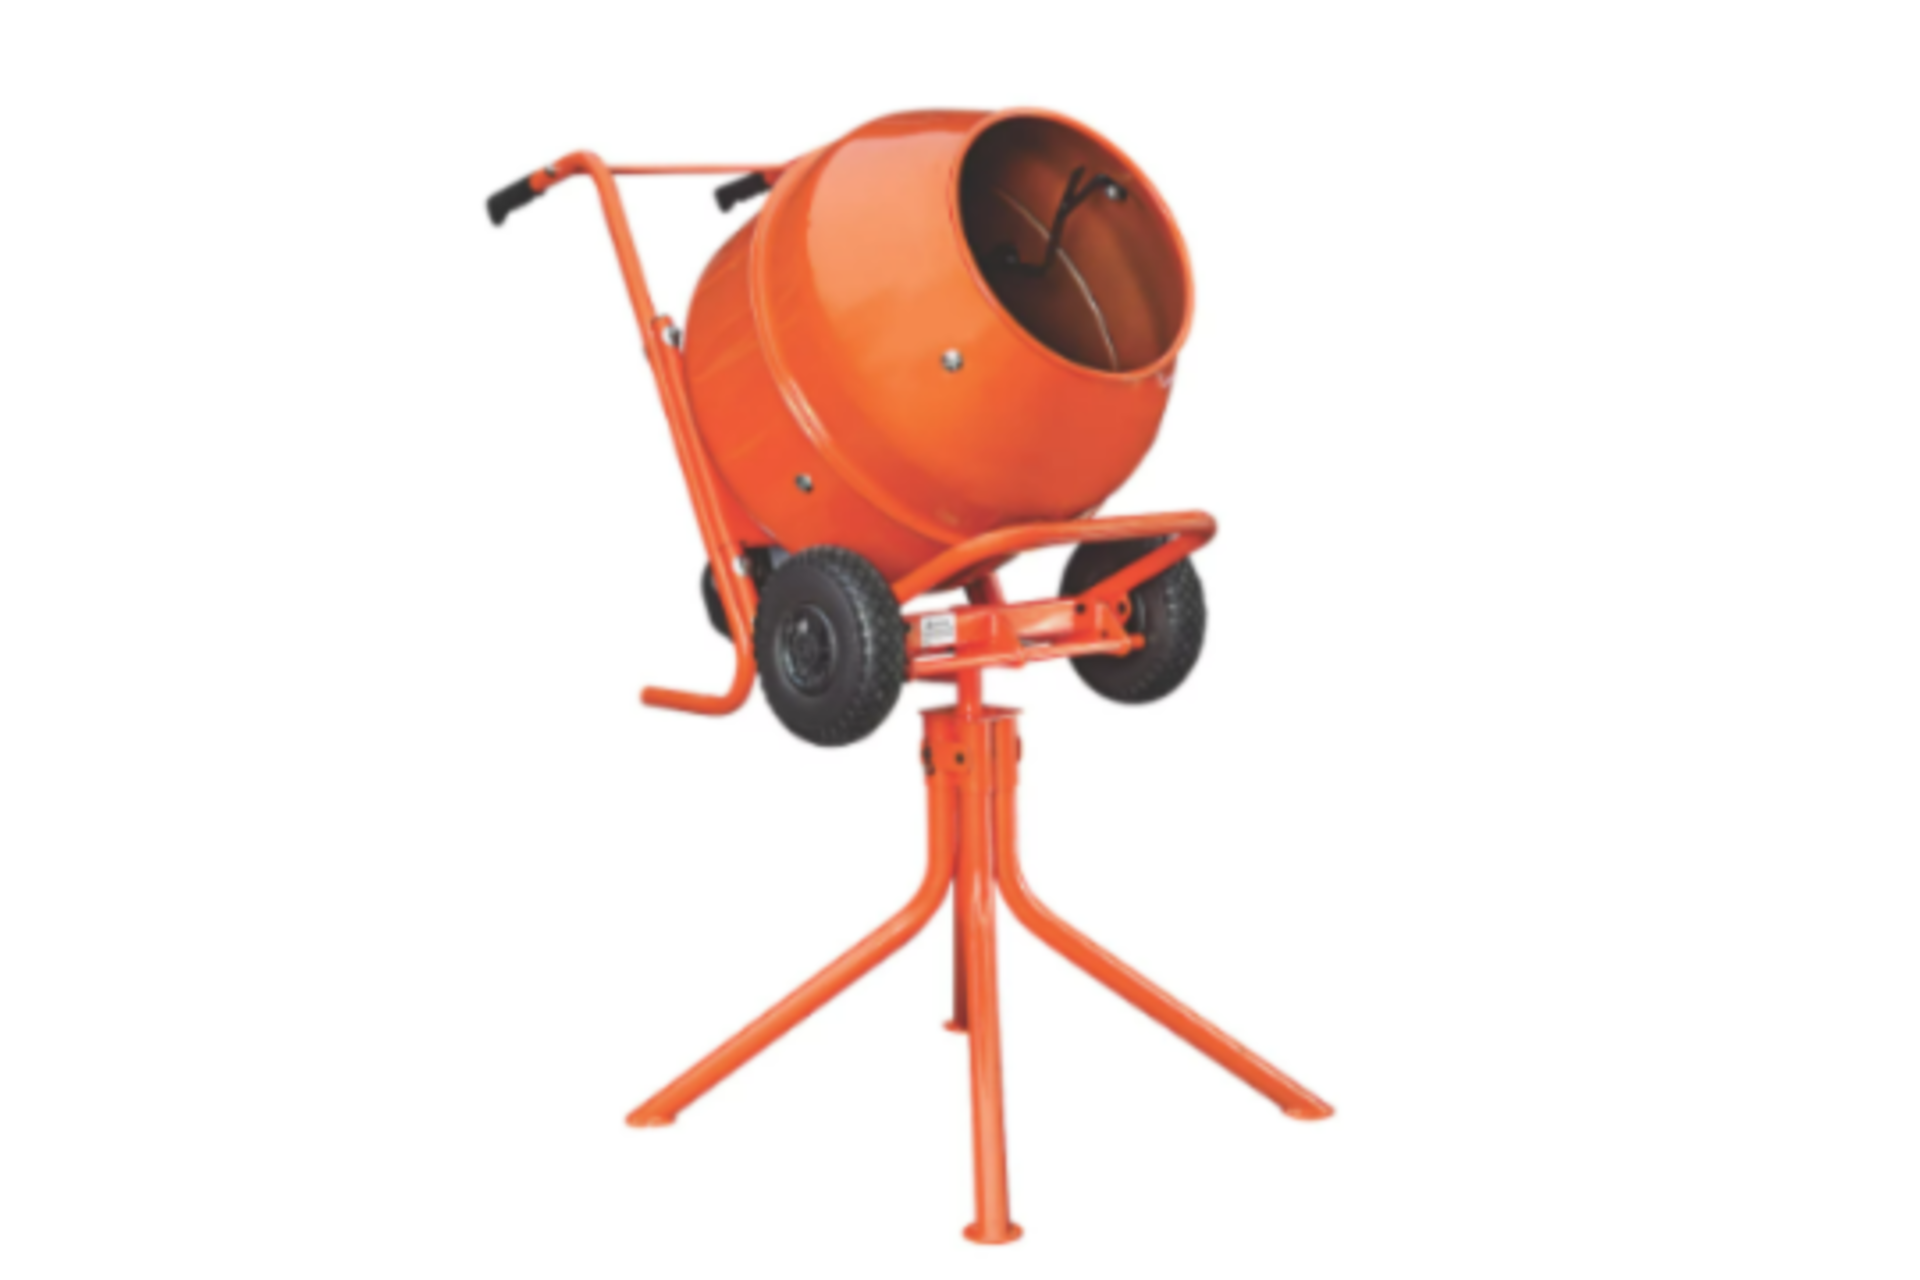 134LTR CONCRETE MIXER 230V. Upright mixer for small to medium building projects. Light and